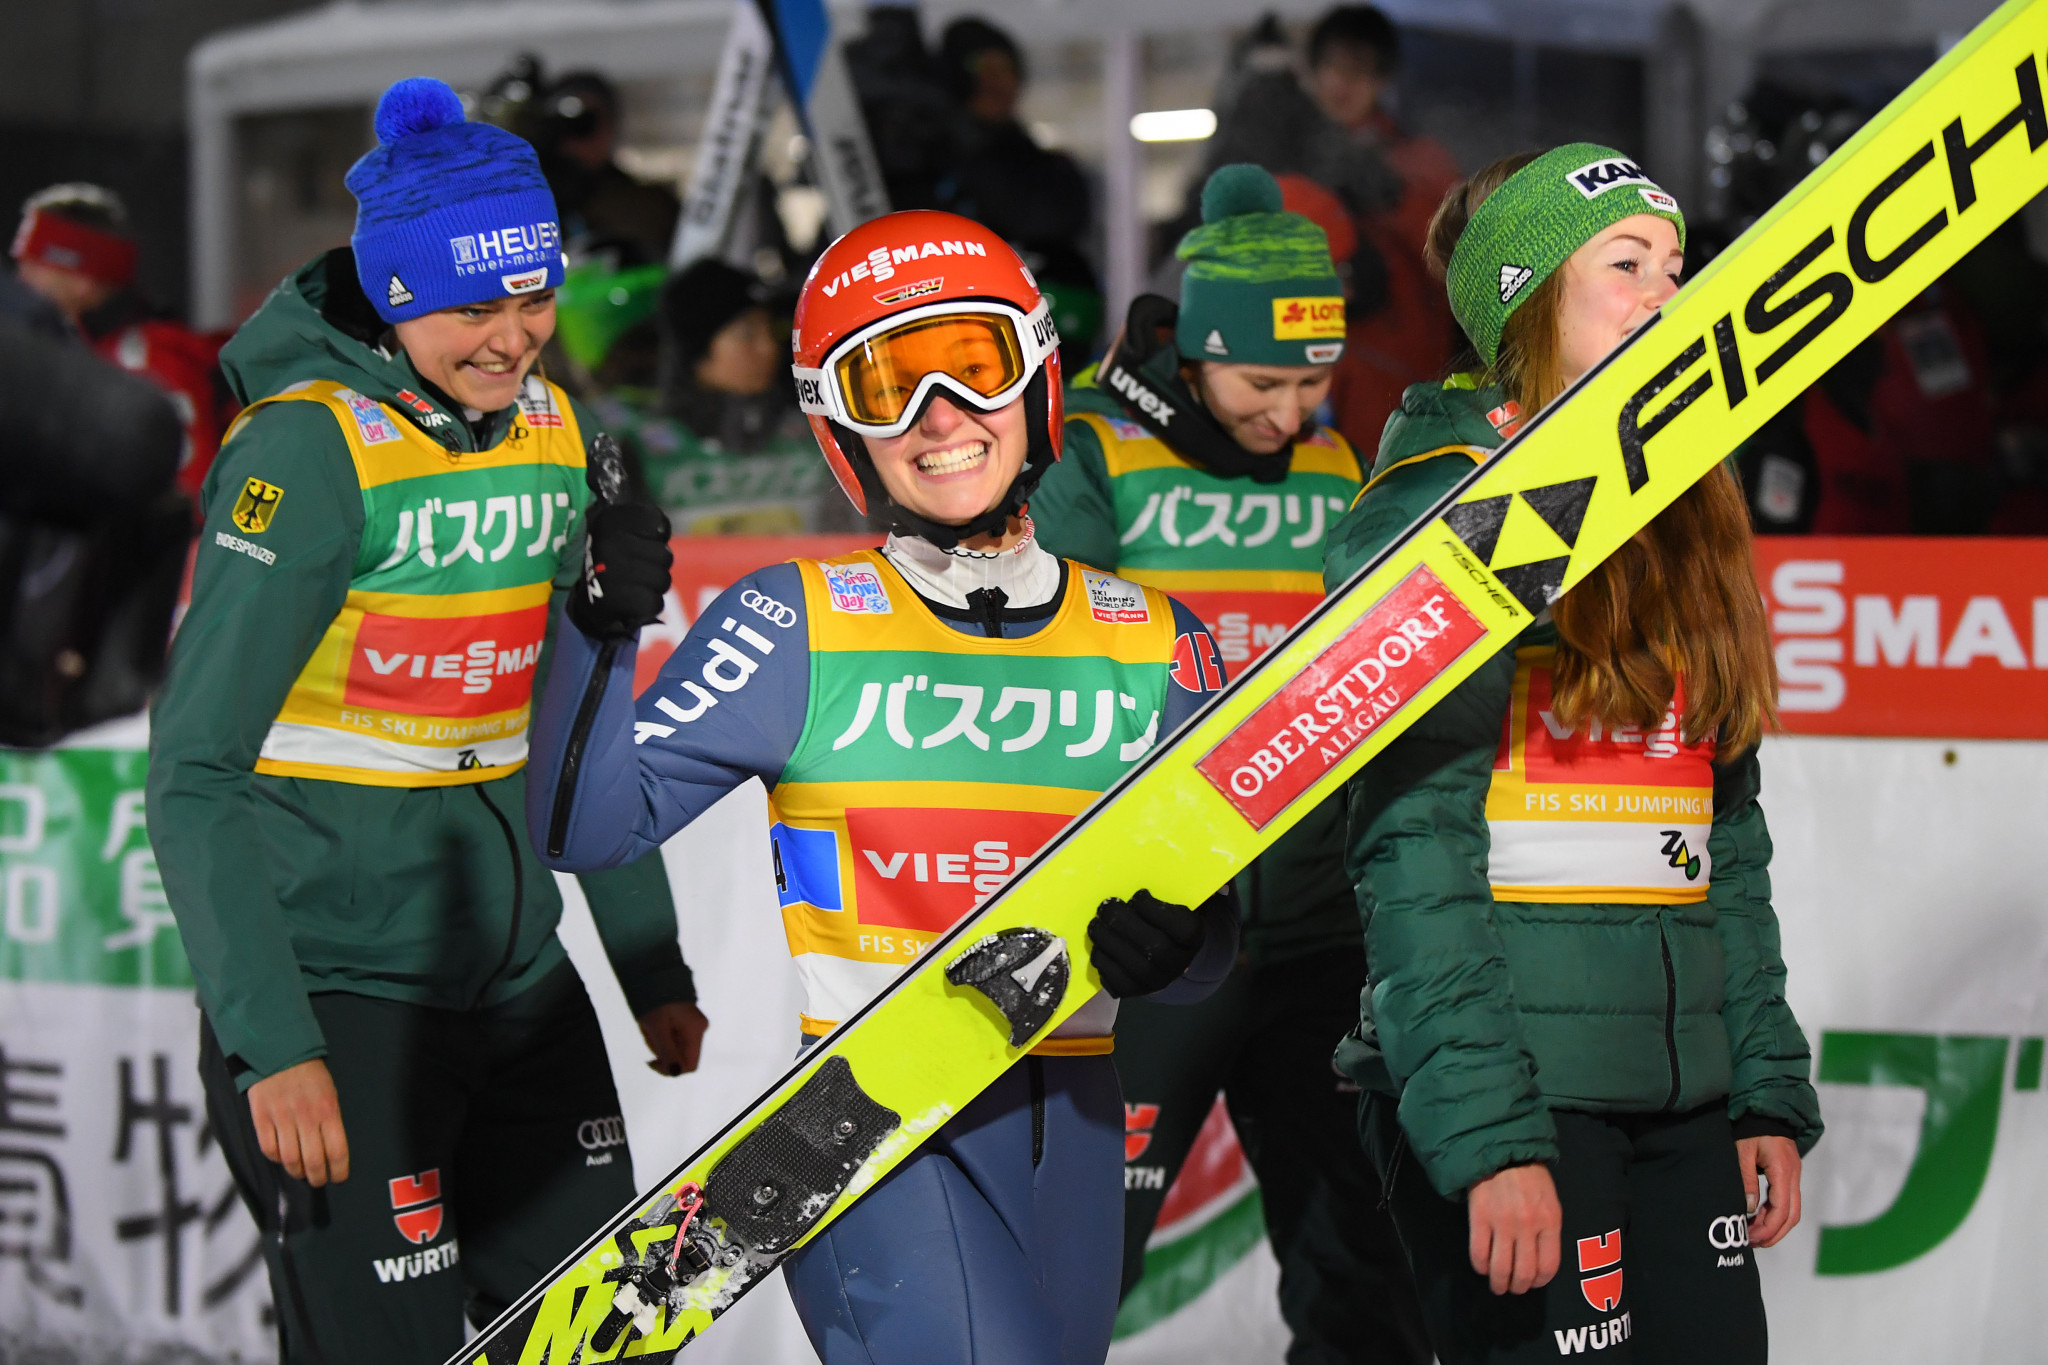 Germany win team titles at FIS Ski Jumping World Cup events in Zao and Zakopane